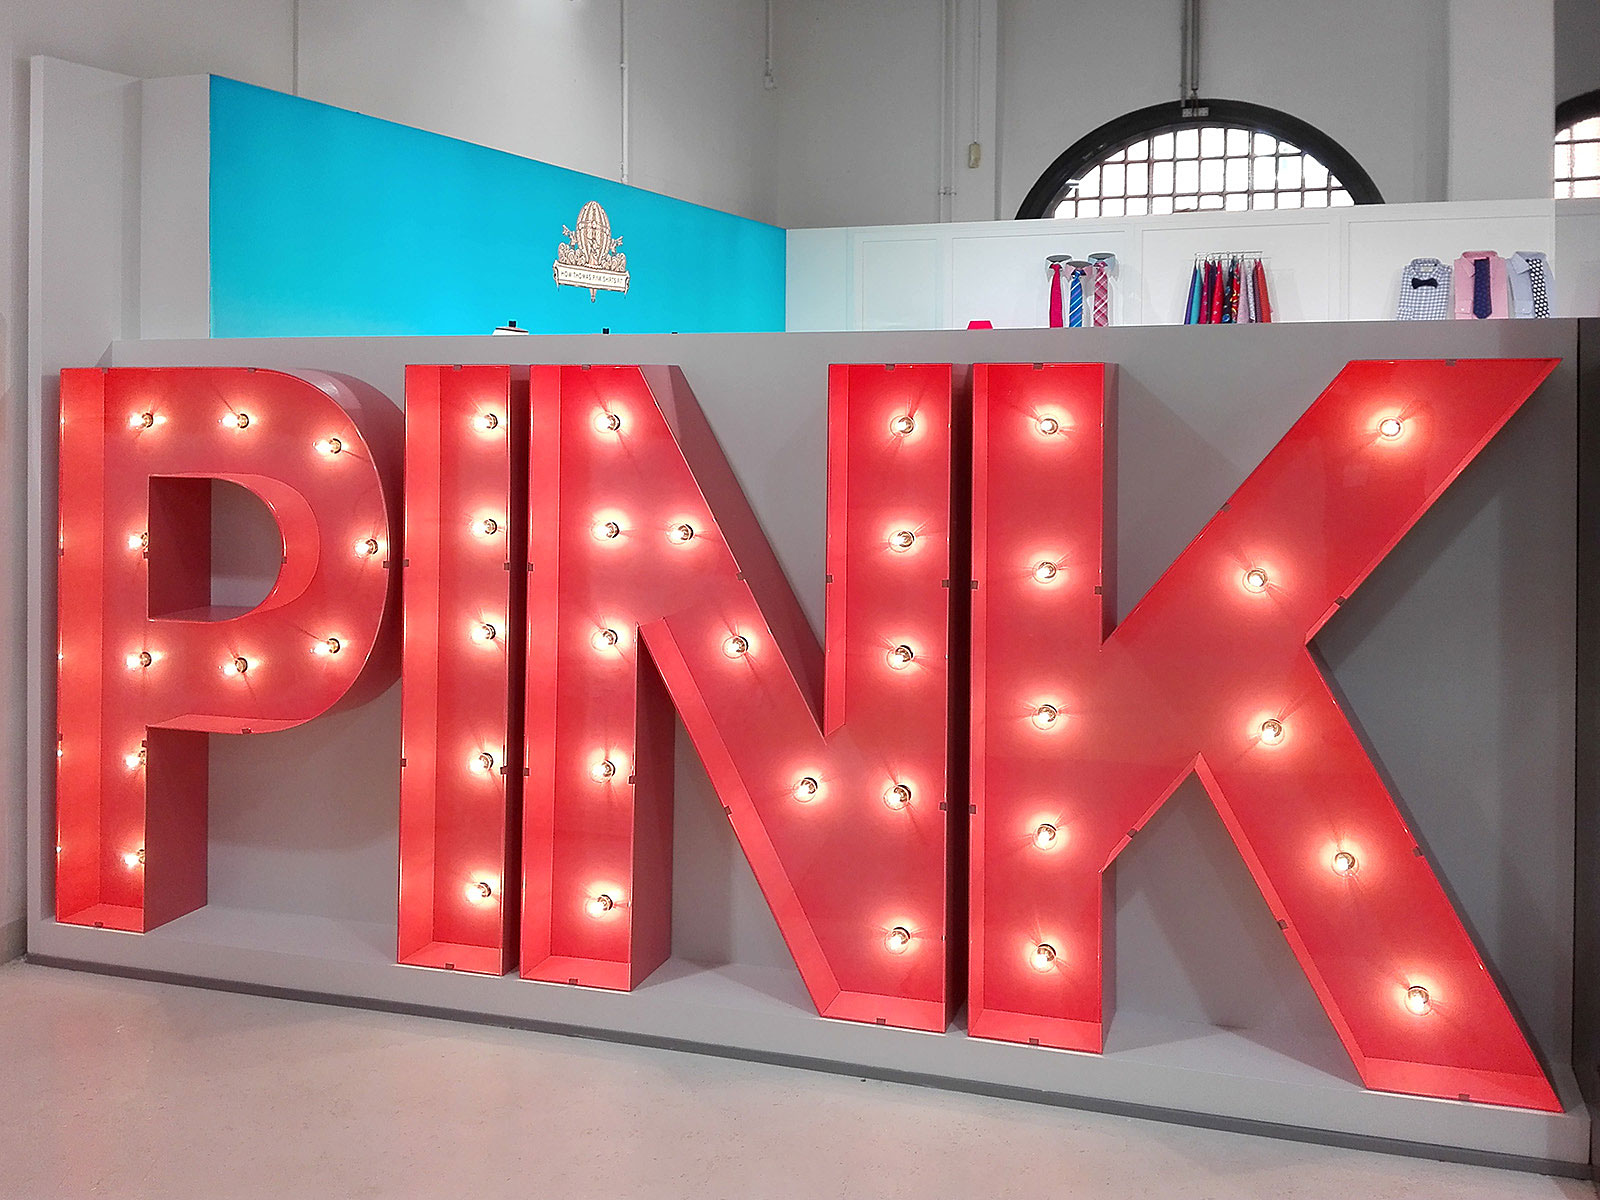 Thomas Pink event scenery detail by Artes Group International